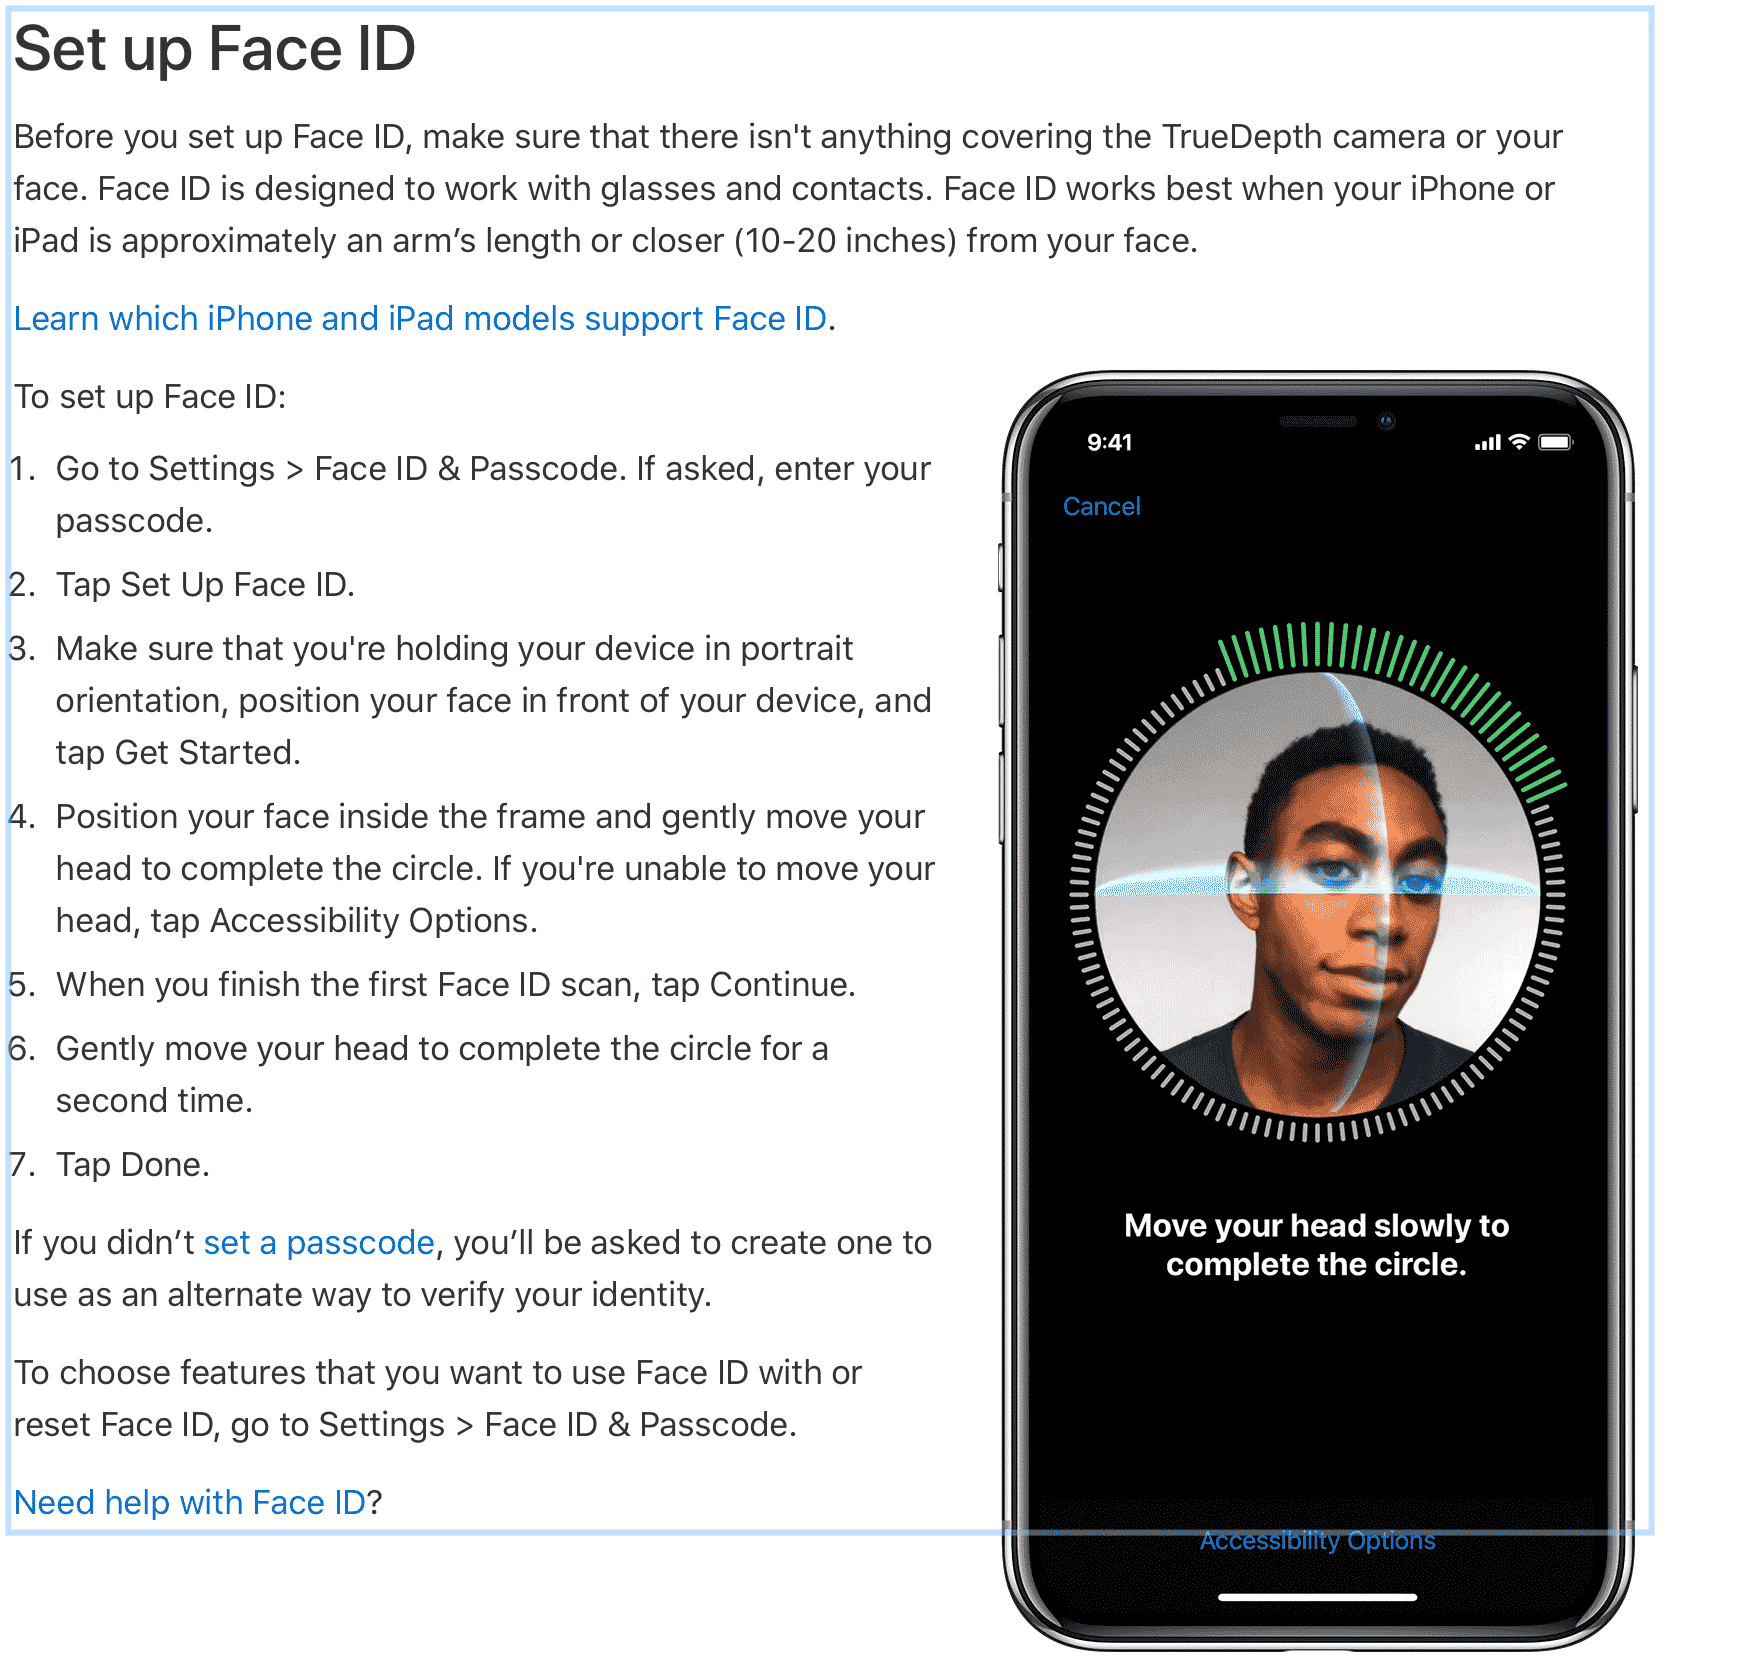 iPhone XR: Face ID is not available, Try â¦